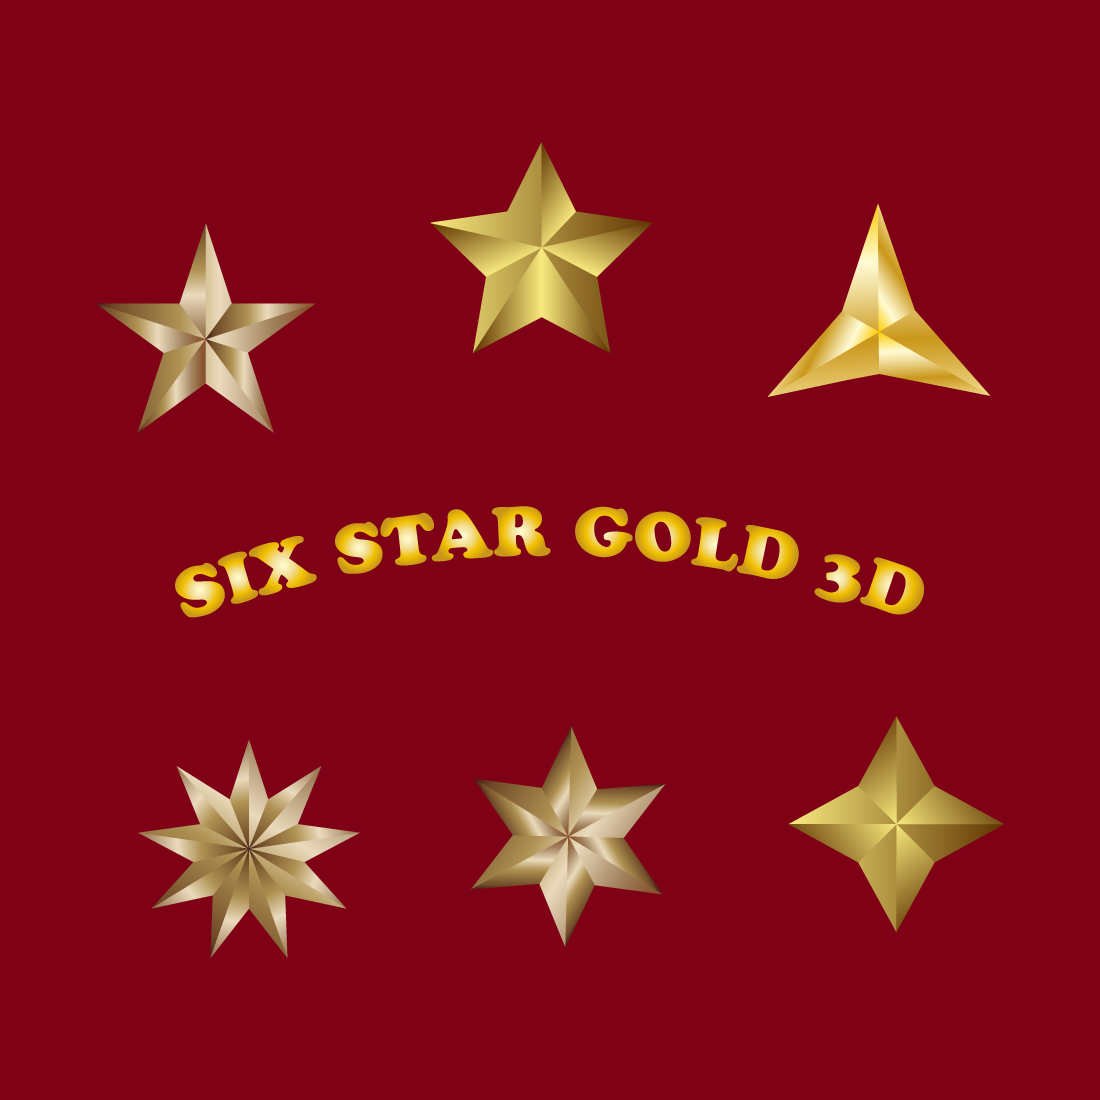 6 star gold 3d cover 1 3